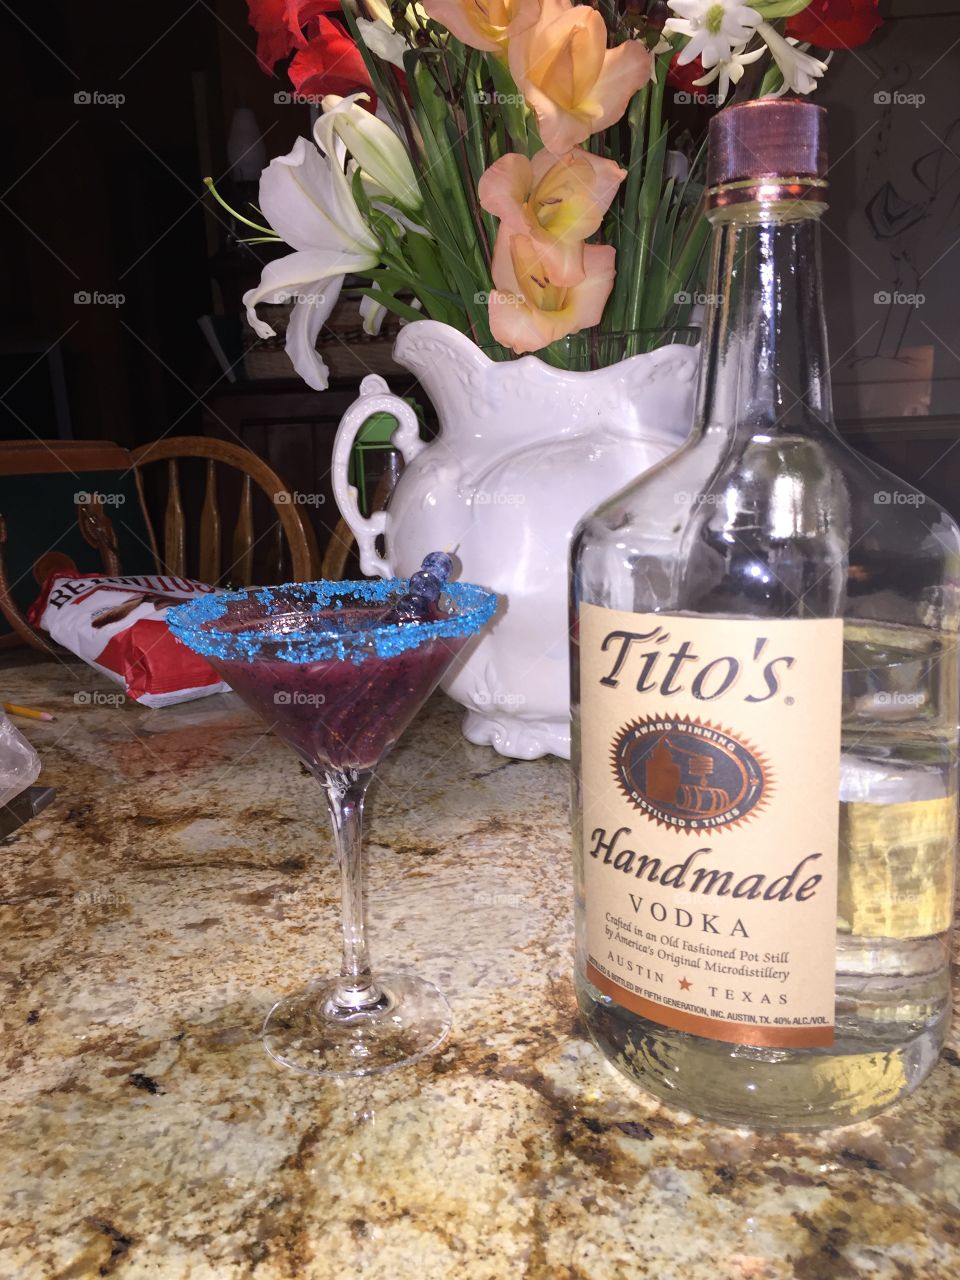 Blueberry Tito's martini. Cocktail experiment night! Blended blueberries and Tito's vodka! 